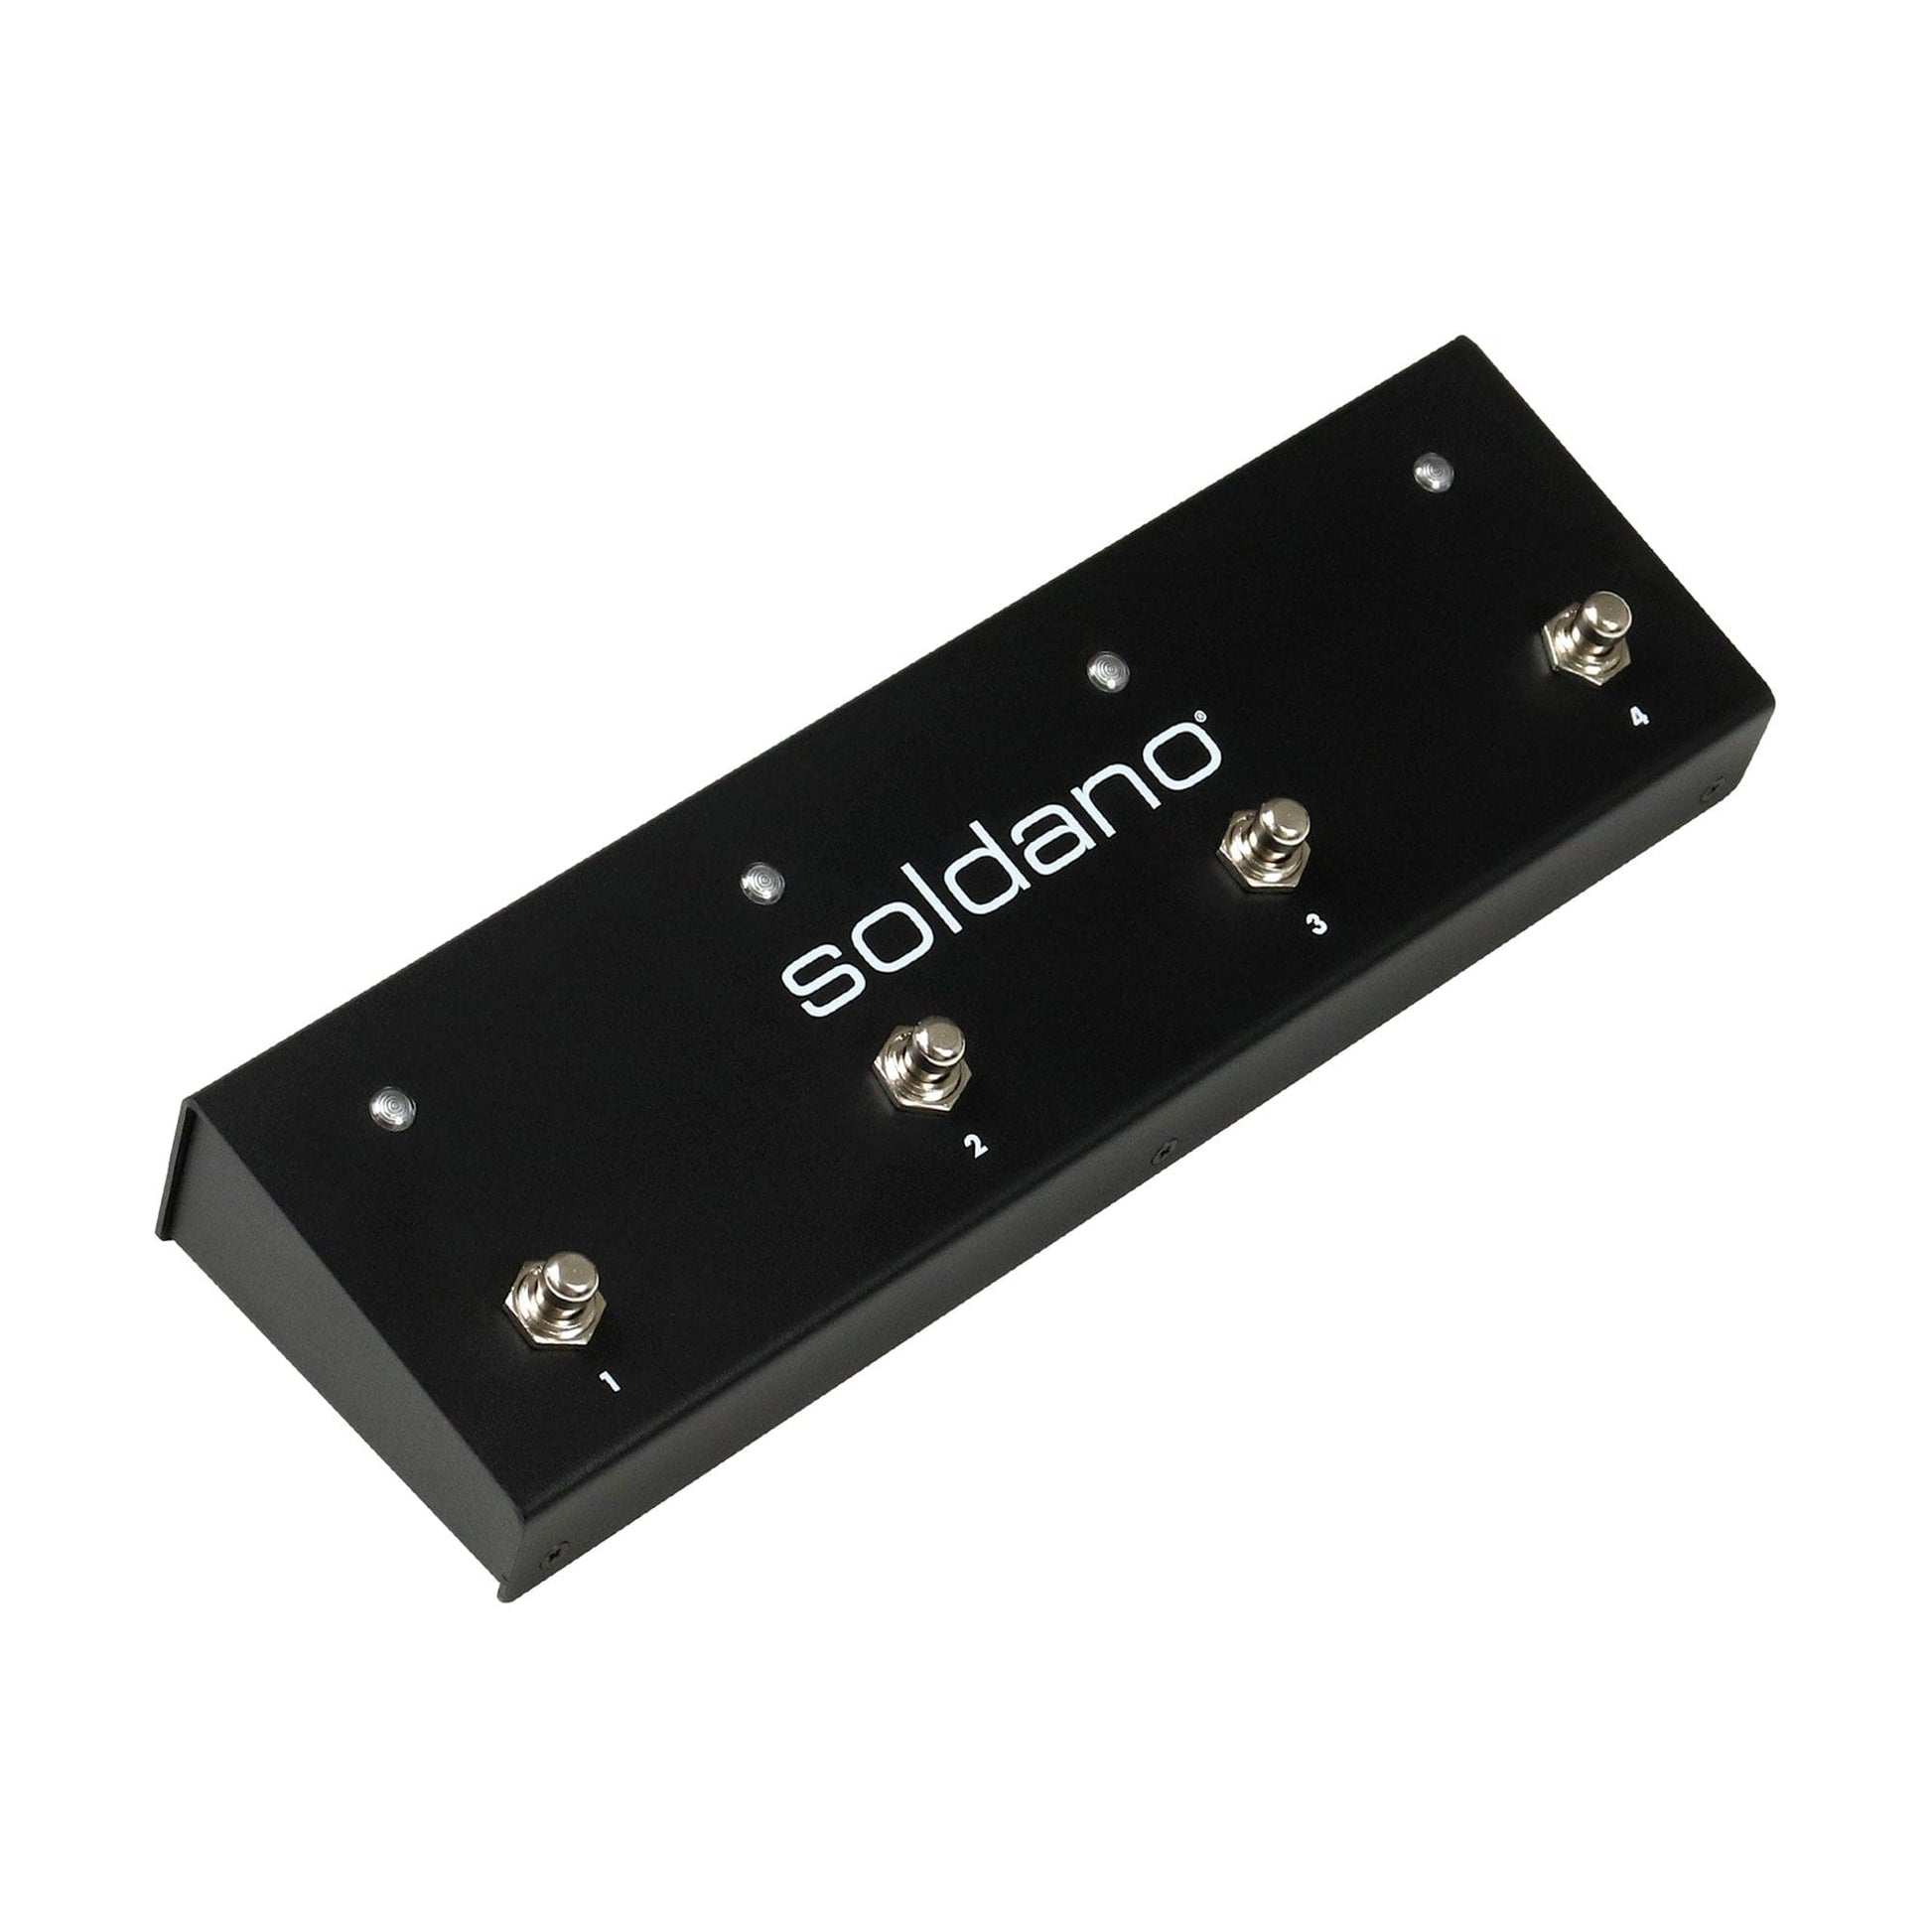 Soldano Astro 20w 1x12 All-tube Combo Amps / Guitar Combos